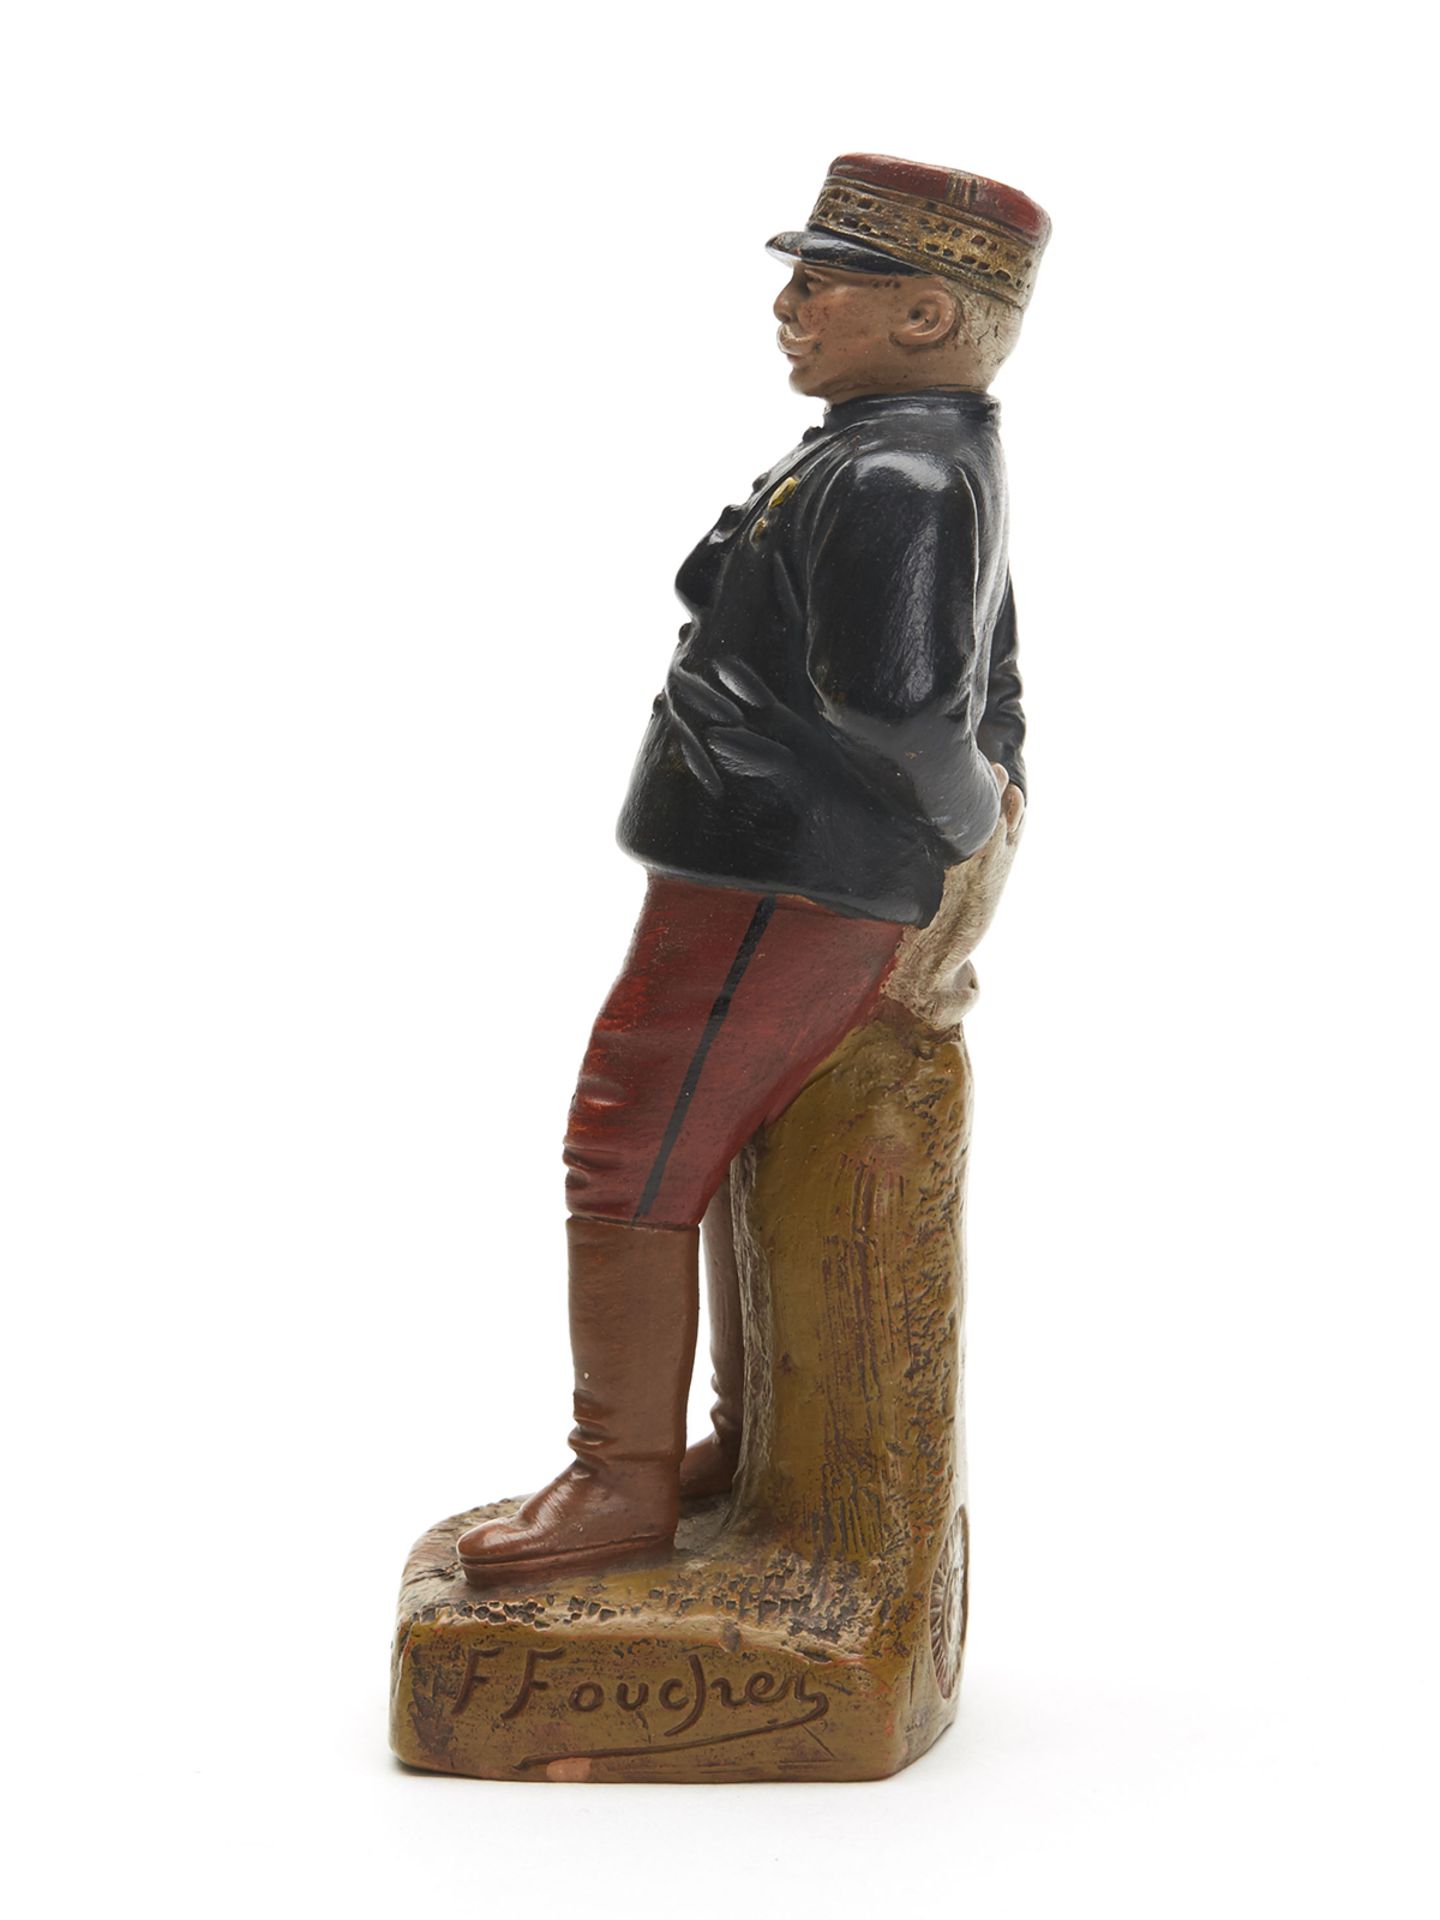 Rare Fontaine & Durieux Joffre Figure By F Foucher C.1914 - Image 4 of 9